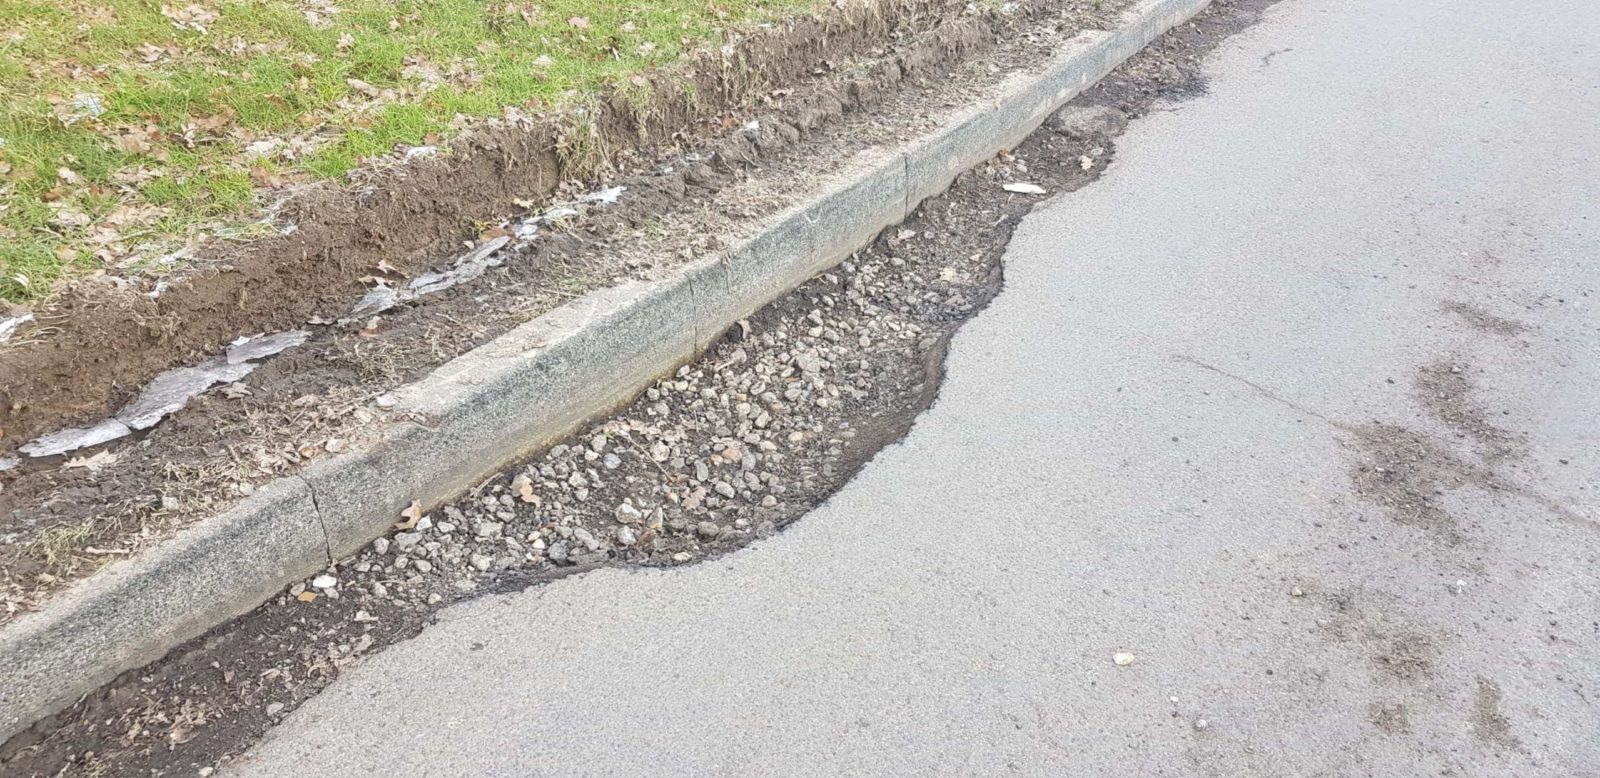 Road surface breaking up - verges damaged